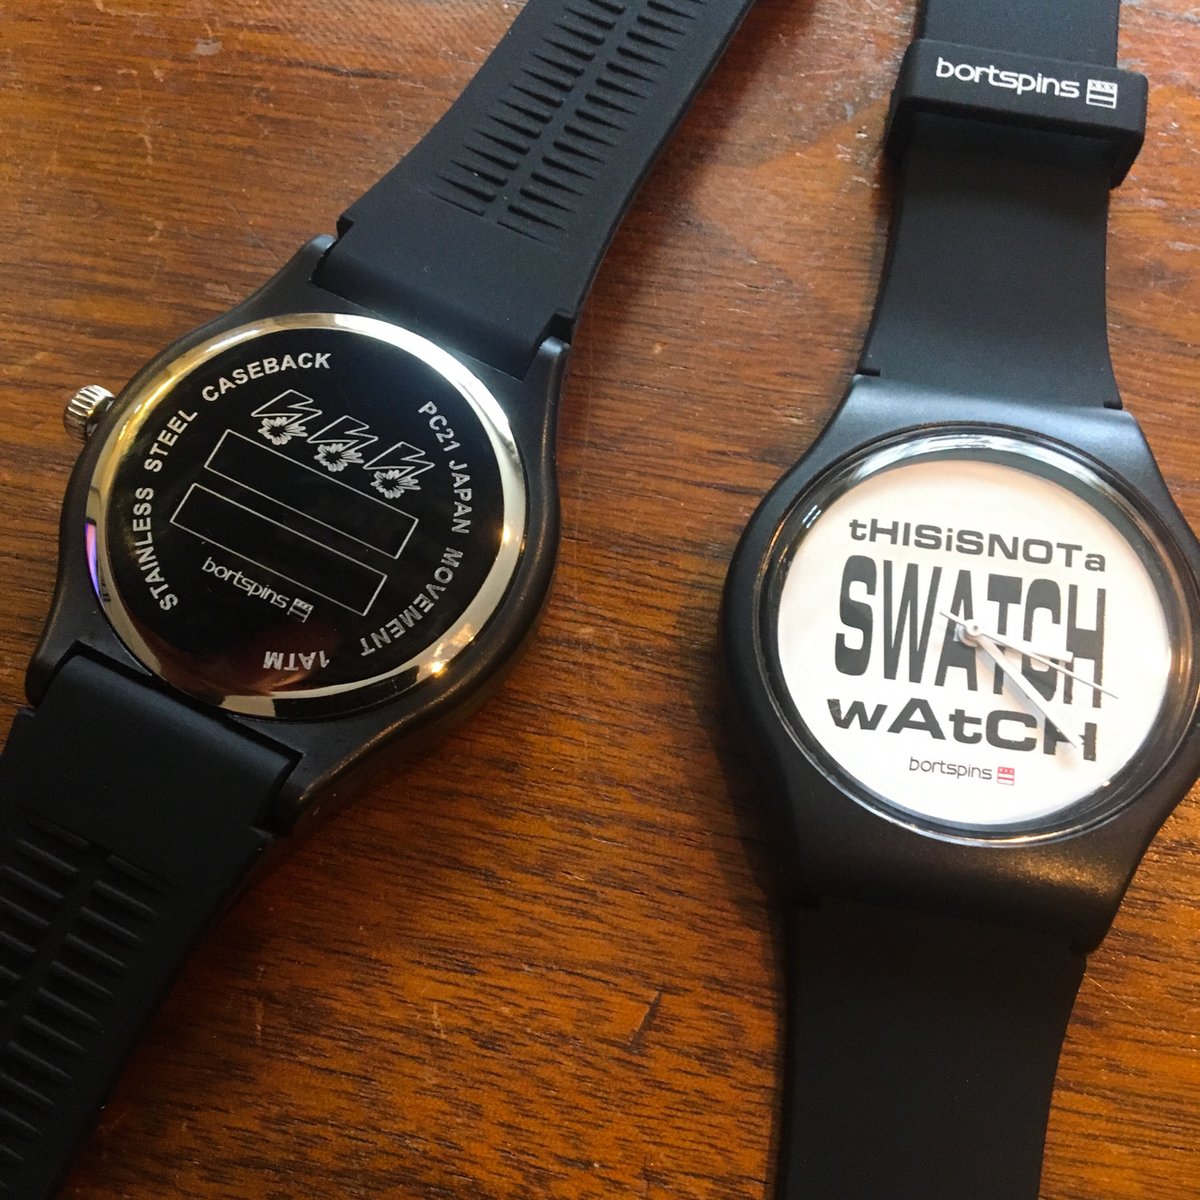 Image of tHISiSNOTa SWATCH wAtCH Watch and Stickers